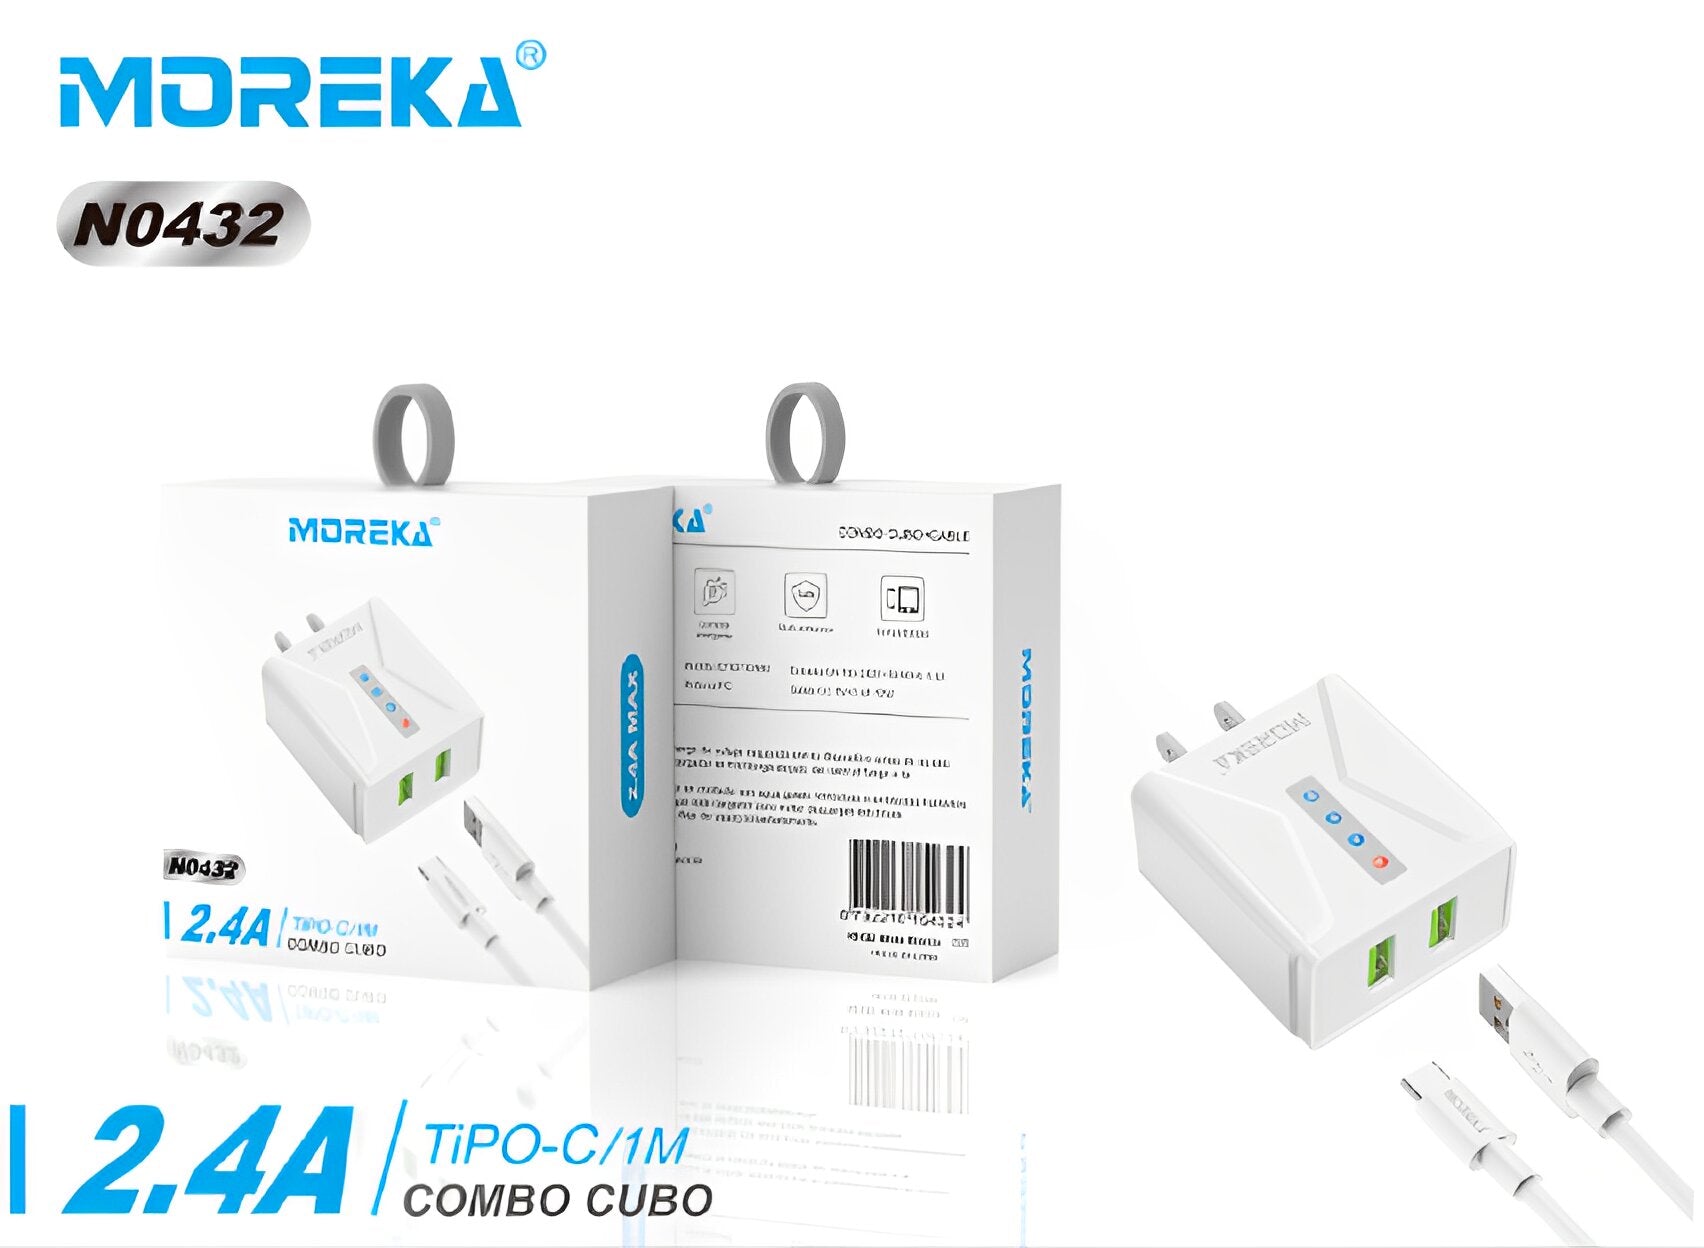 Moreka N0432 2.4A 2 USB Charger Includes Cable C 1M